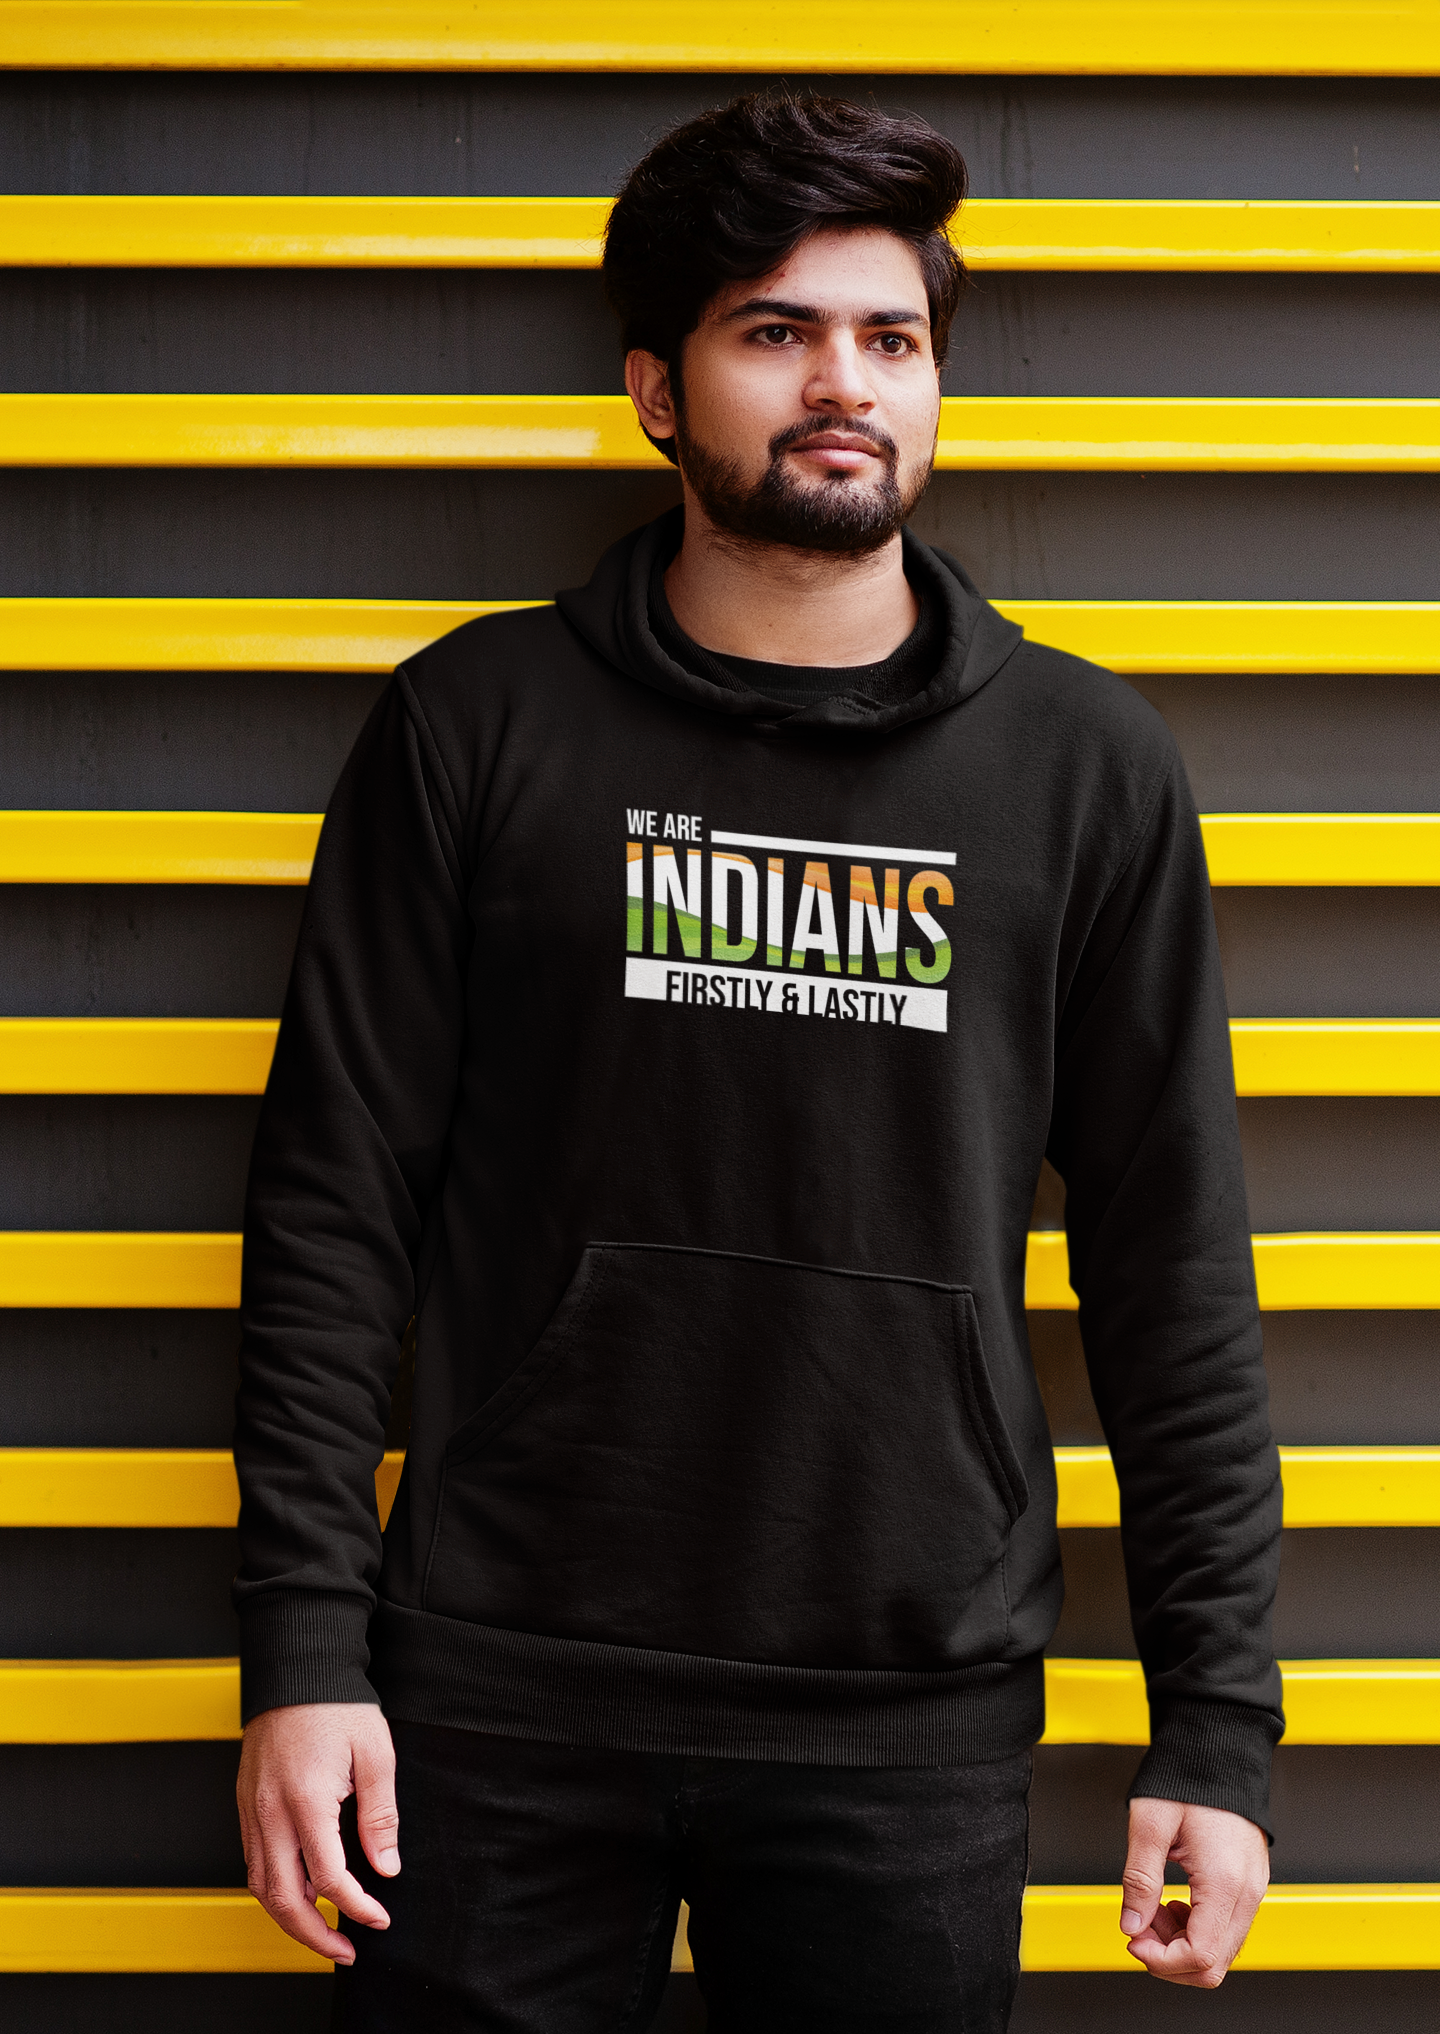 We are Indians Firstly & Lastly - Dr Ambedkar Hoodie